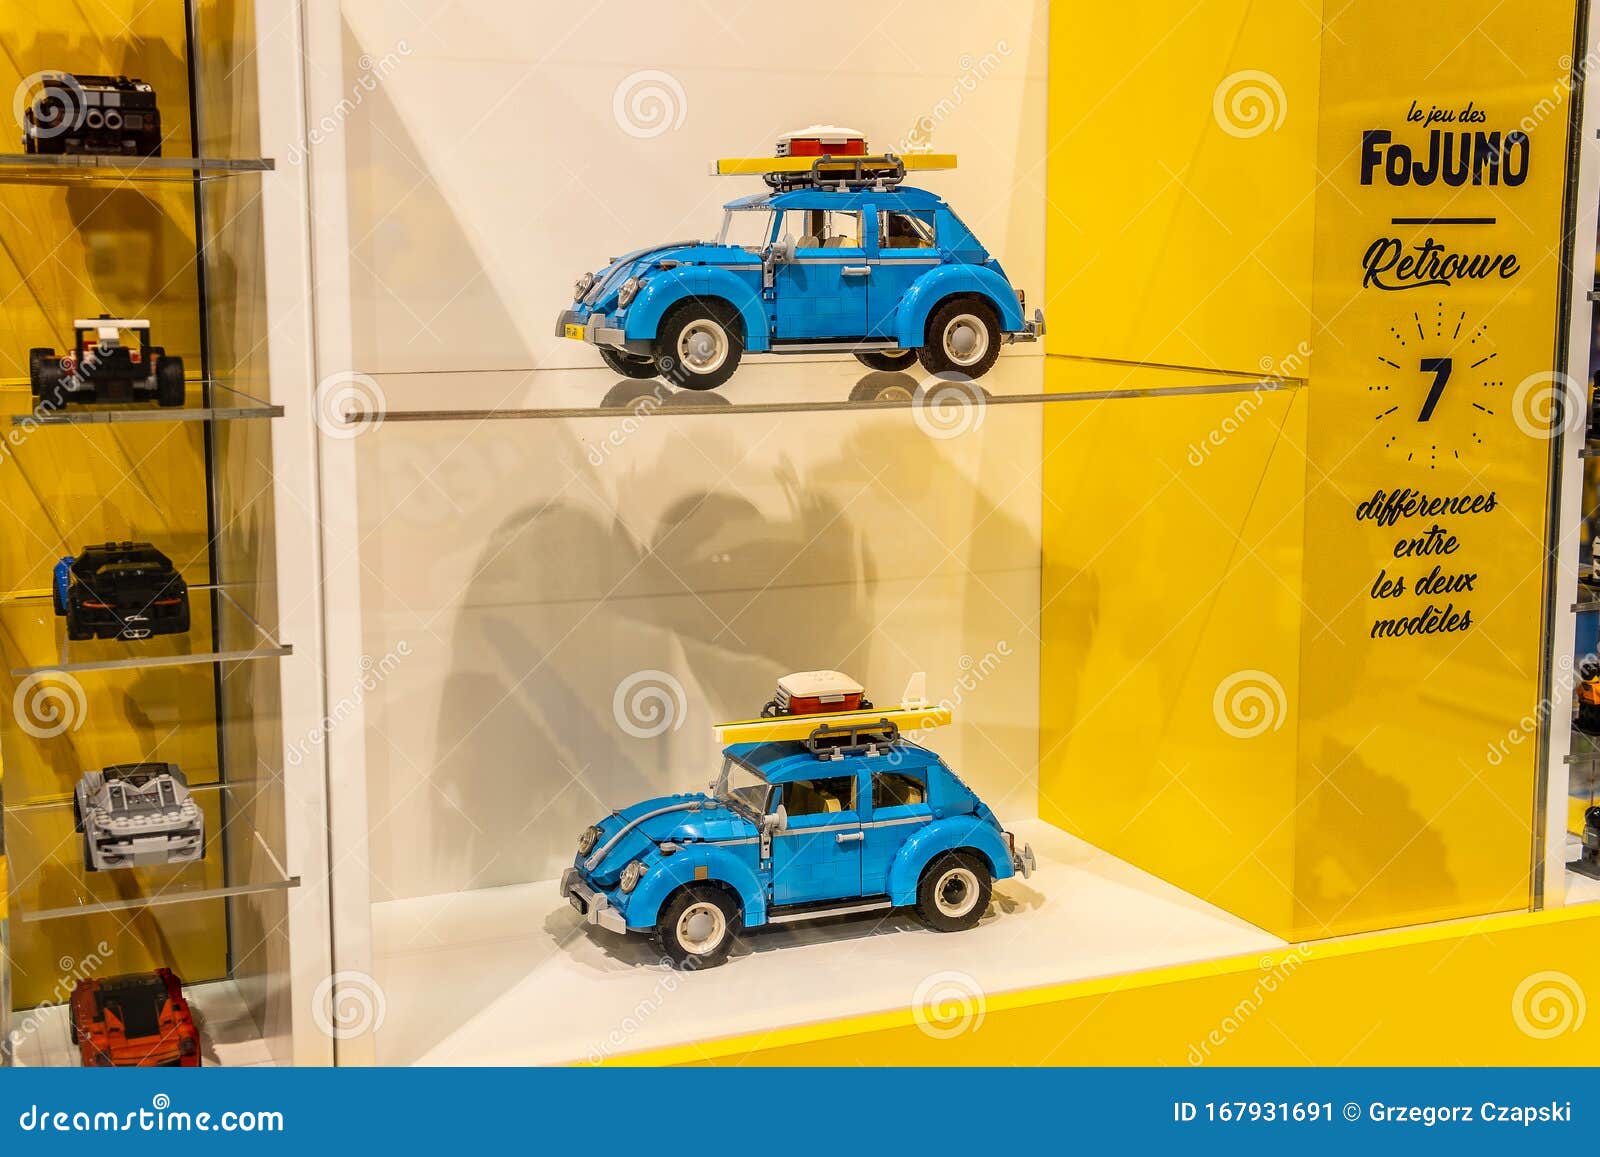 Lego Creator, Volkswagen Beetle, for Children Age 16 , 10252, Box with  Price in EUR on the Shop Display for Sale Editorial Photo - Image of color,  minifigures: 167931691